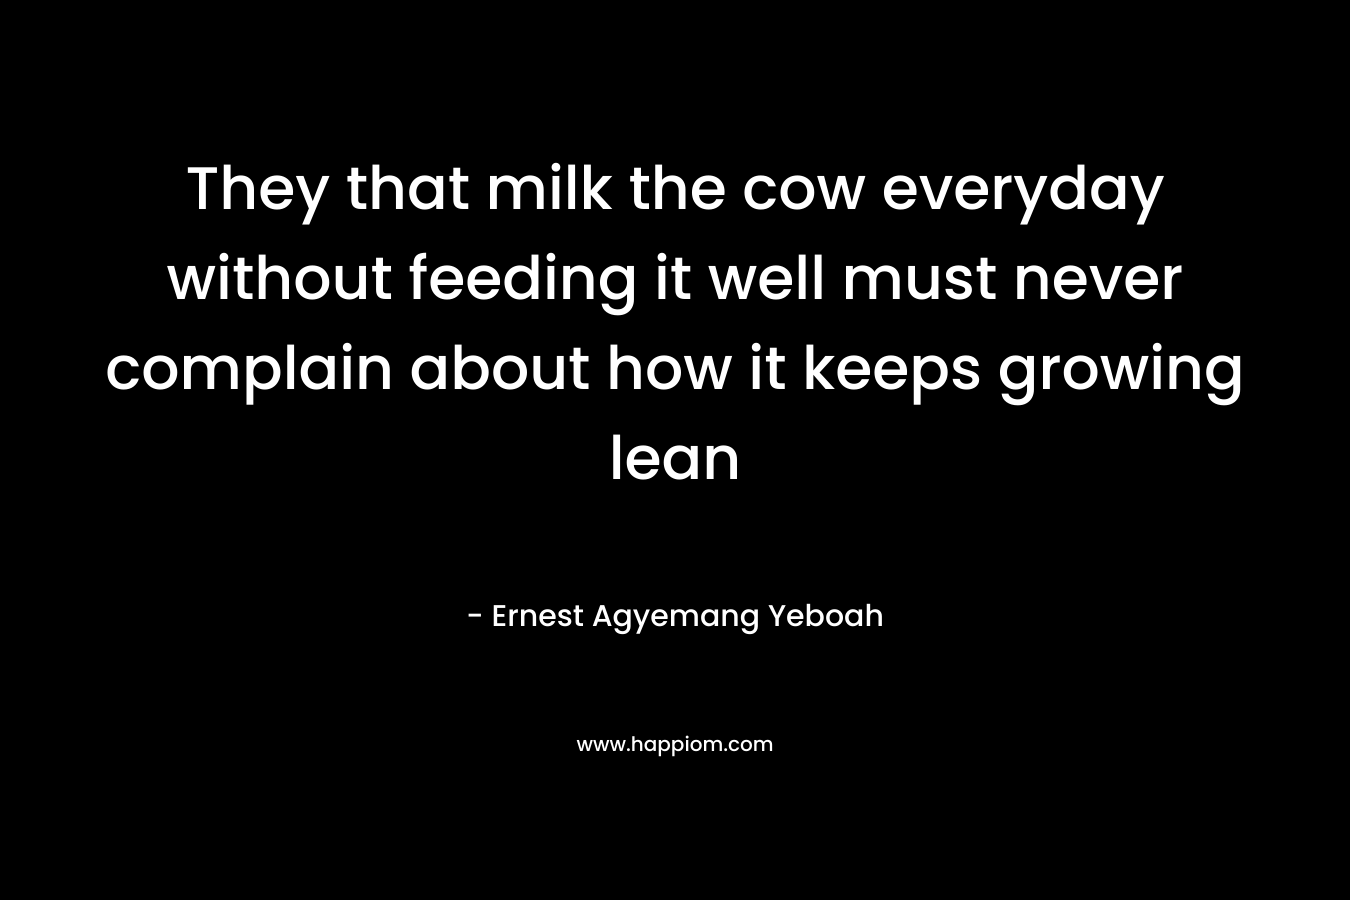 They that milk the cow everyday without feeding it well must never complain about how it keeps growing lean